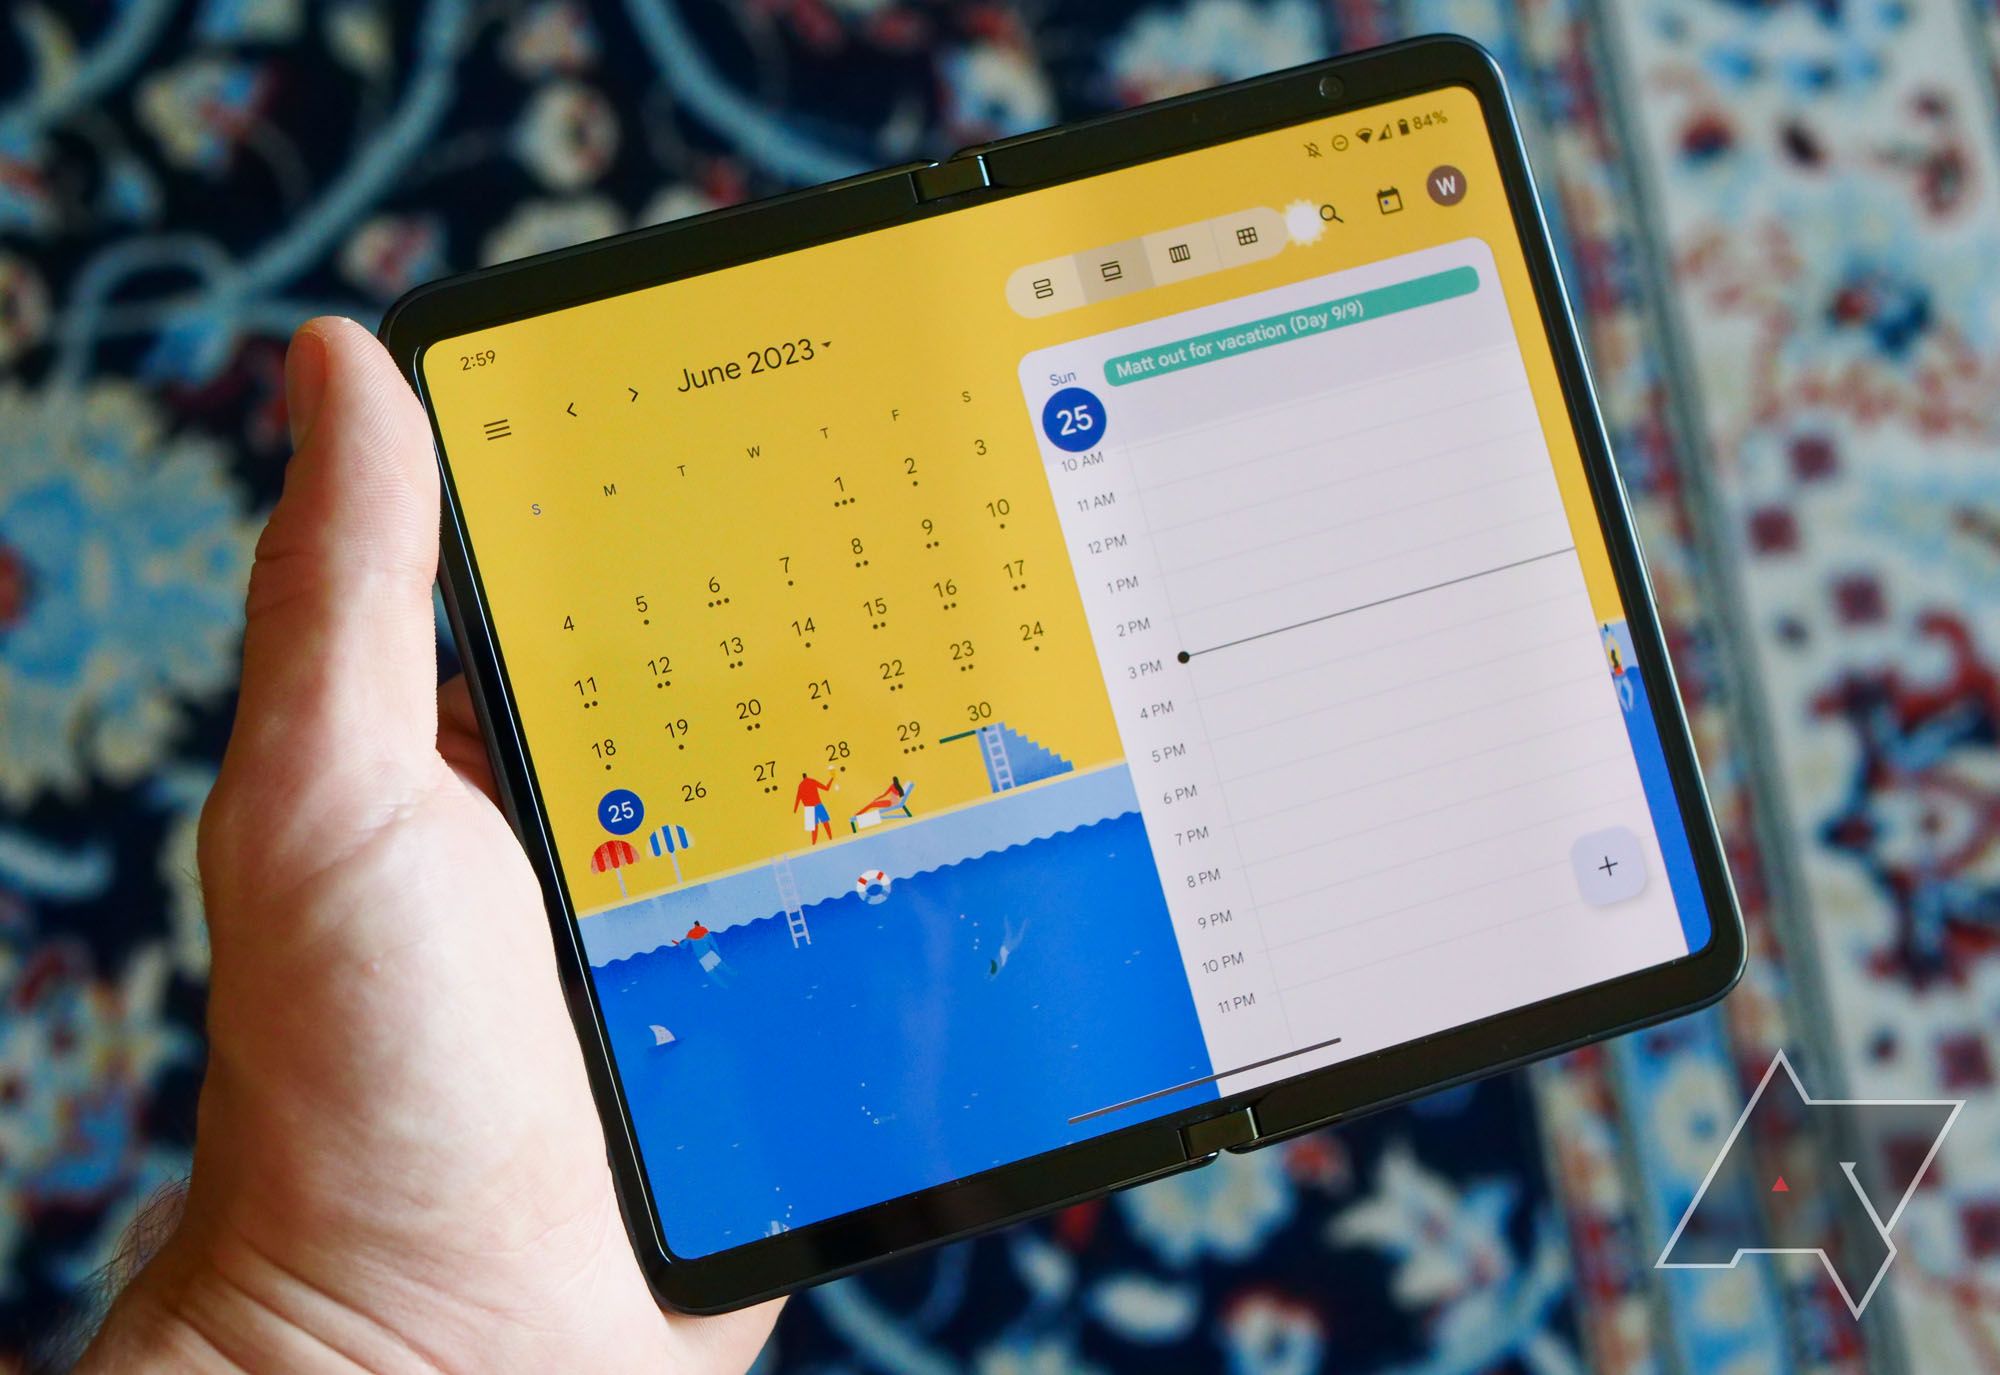 Holding the Pixel Fold in one hand with the calendar app open.